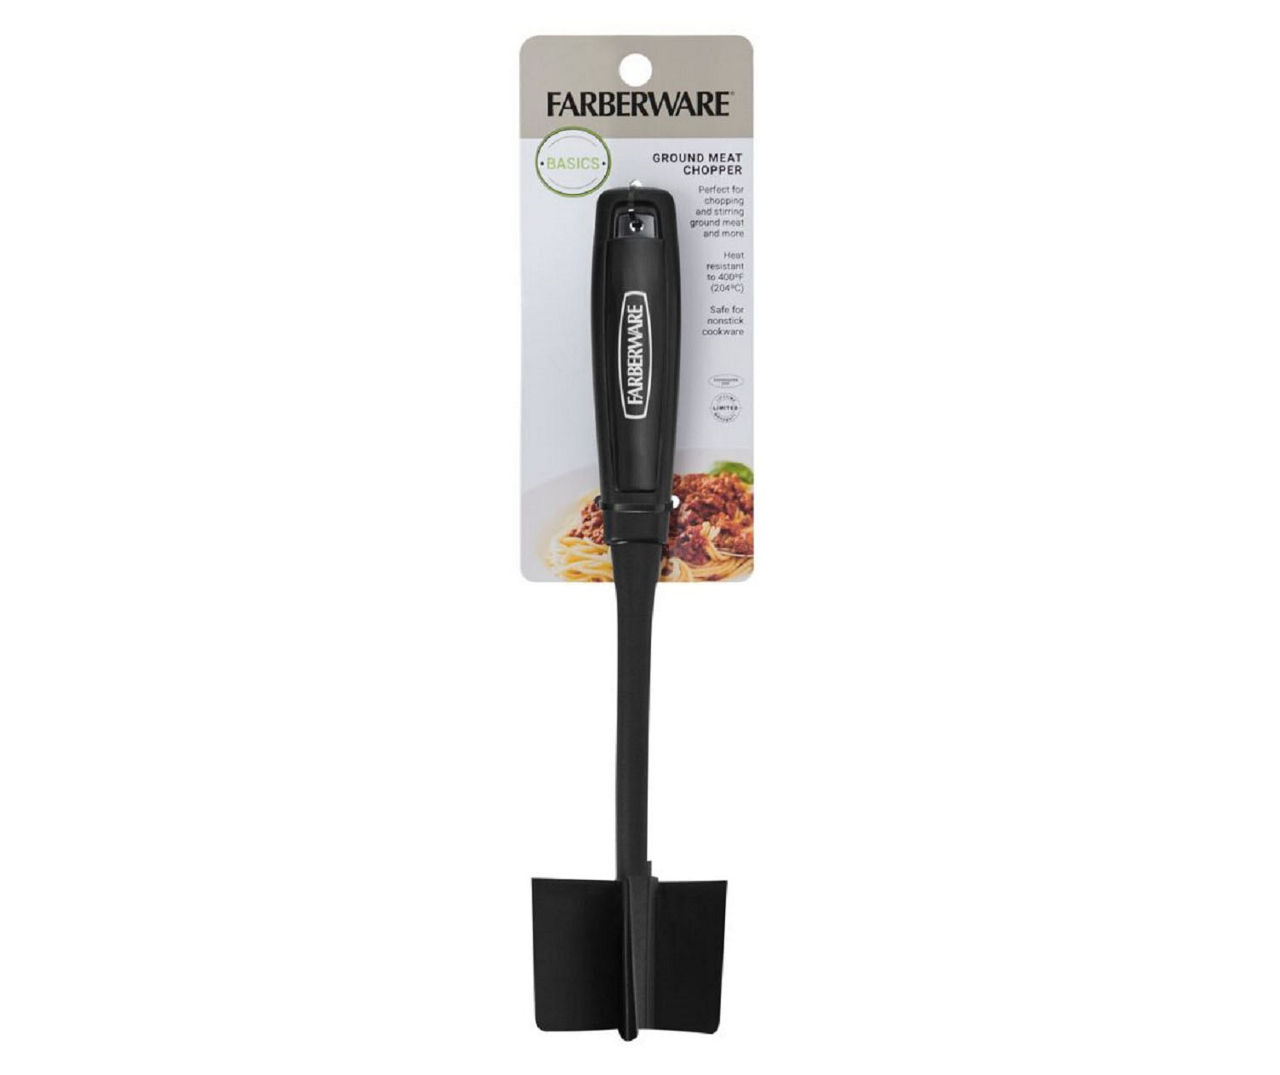 COOKING Concepts Meat Hamburger & Ground Meat Chopper Spatula